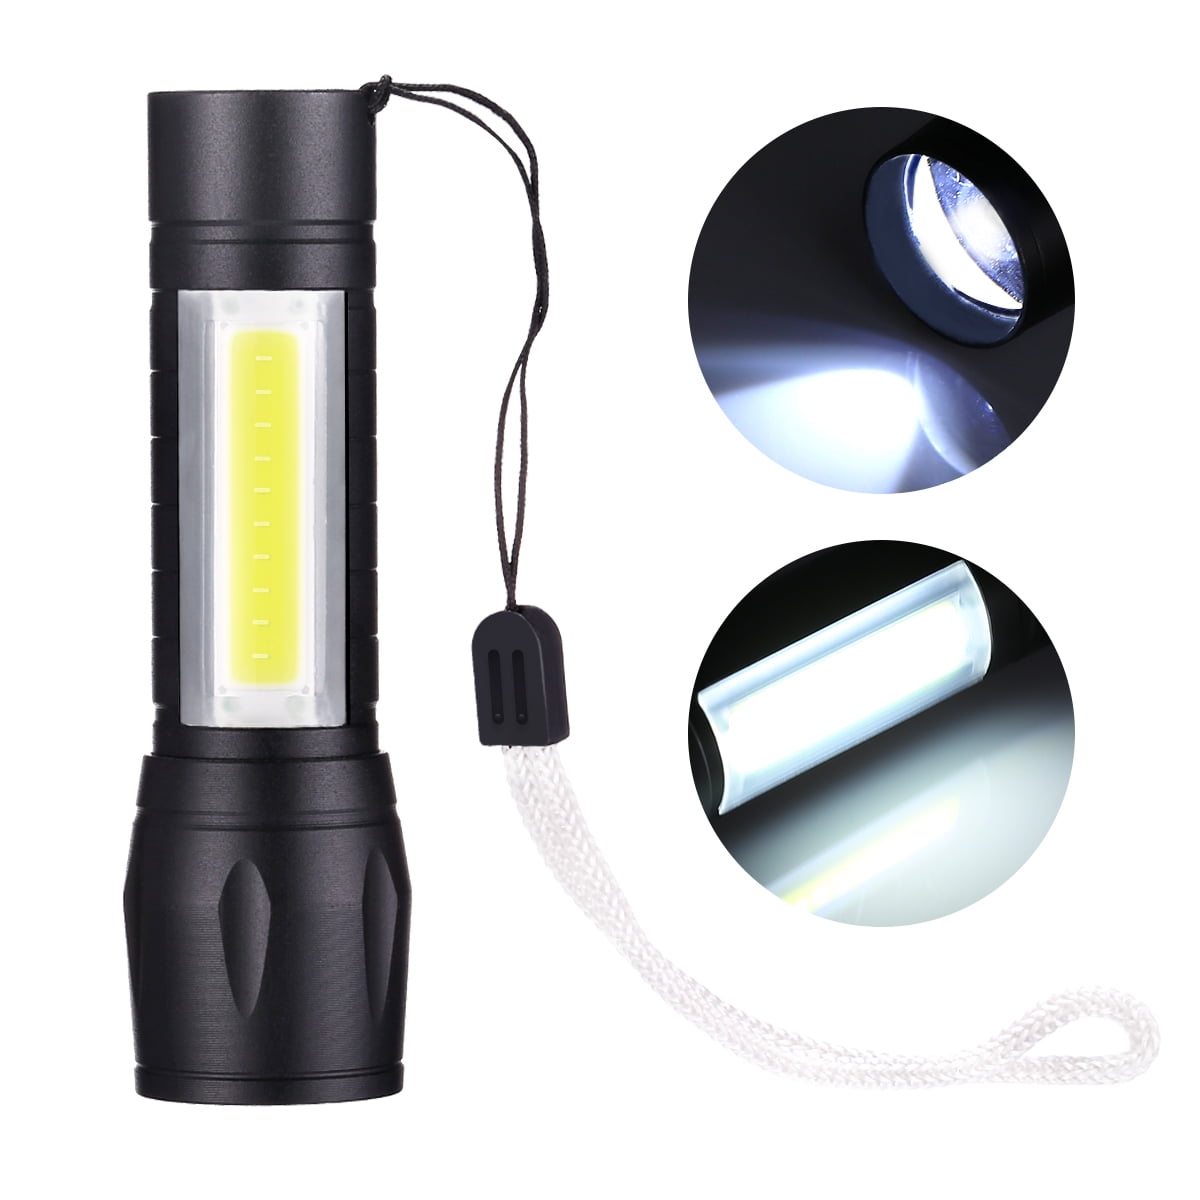 Portable LED Magnetic Rechargable Camping Lamp/Flashlight with Highspeed USB Charger 